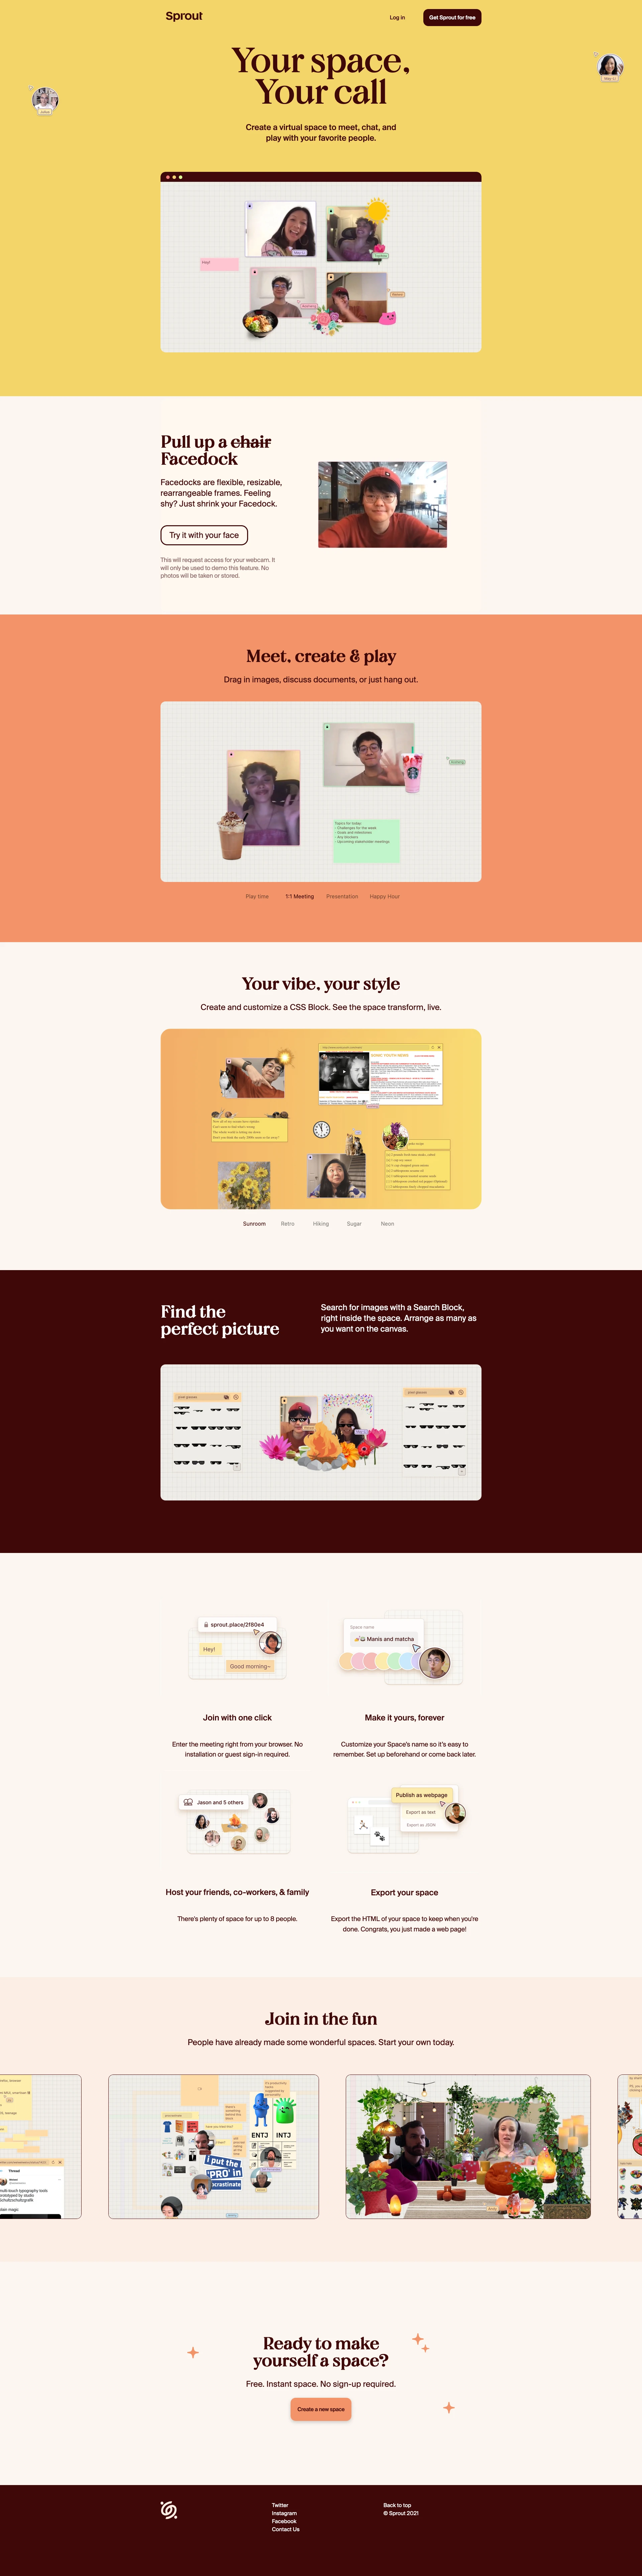 Sprout Landing Page Example: Your space, your call. Create a virtual space to meet, chat, and play with your favorite people.